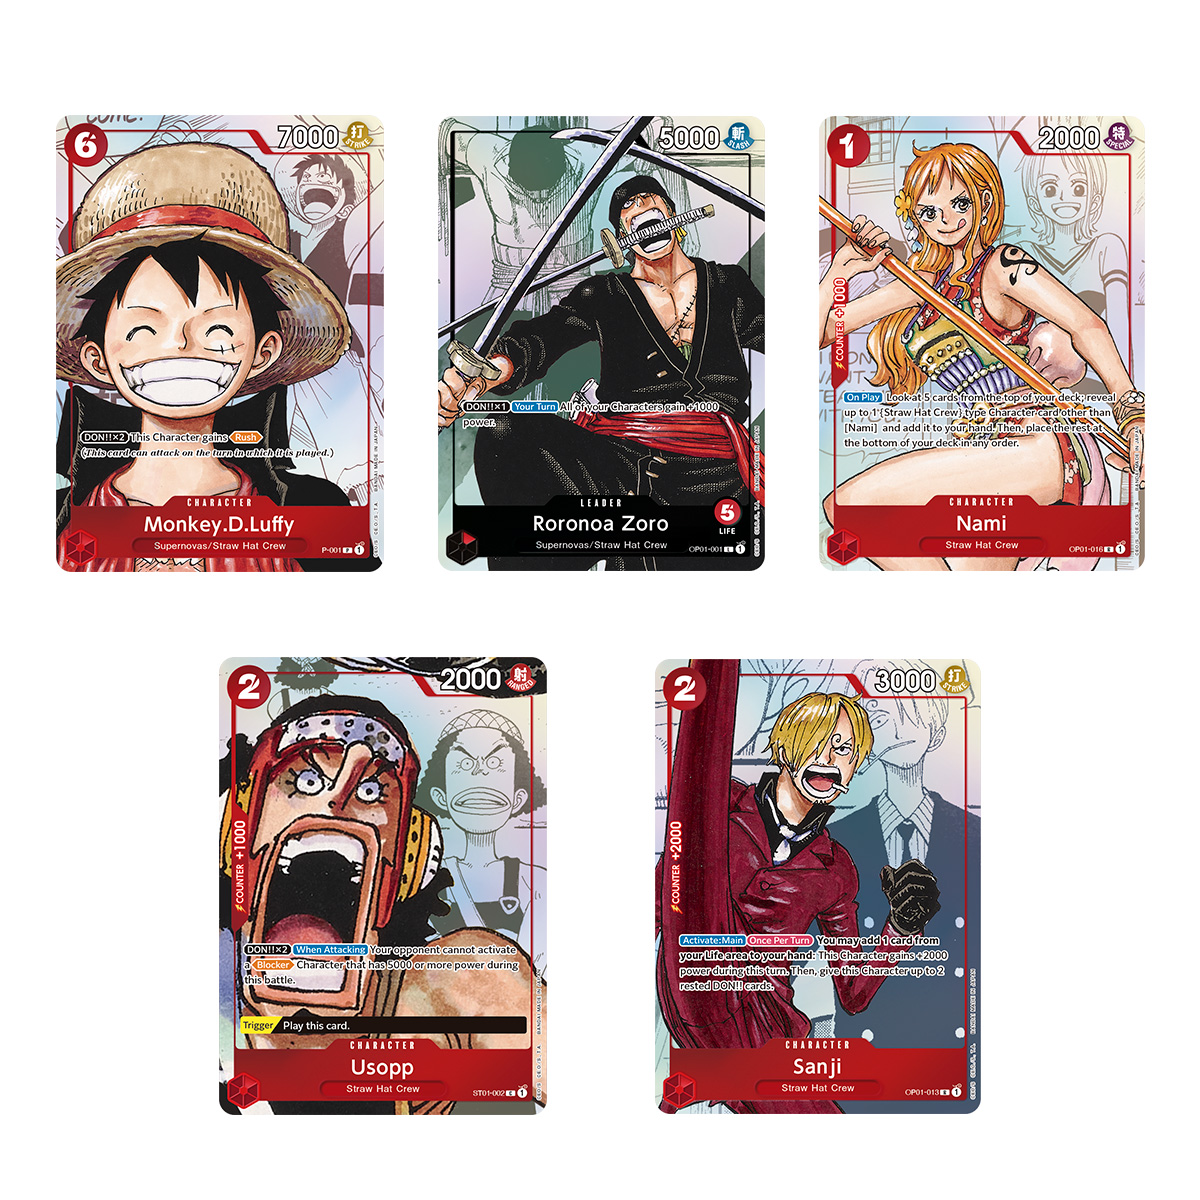 ONE PIECE CARD GAME Premium Card Collection -25th Edition-